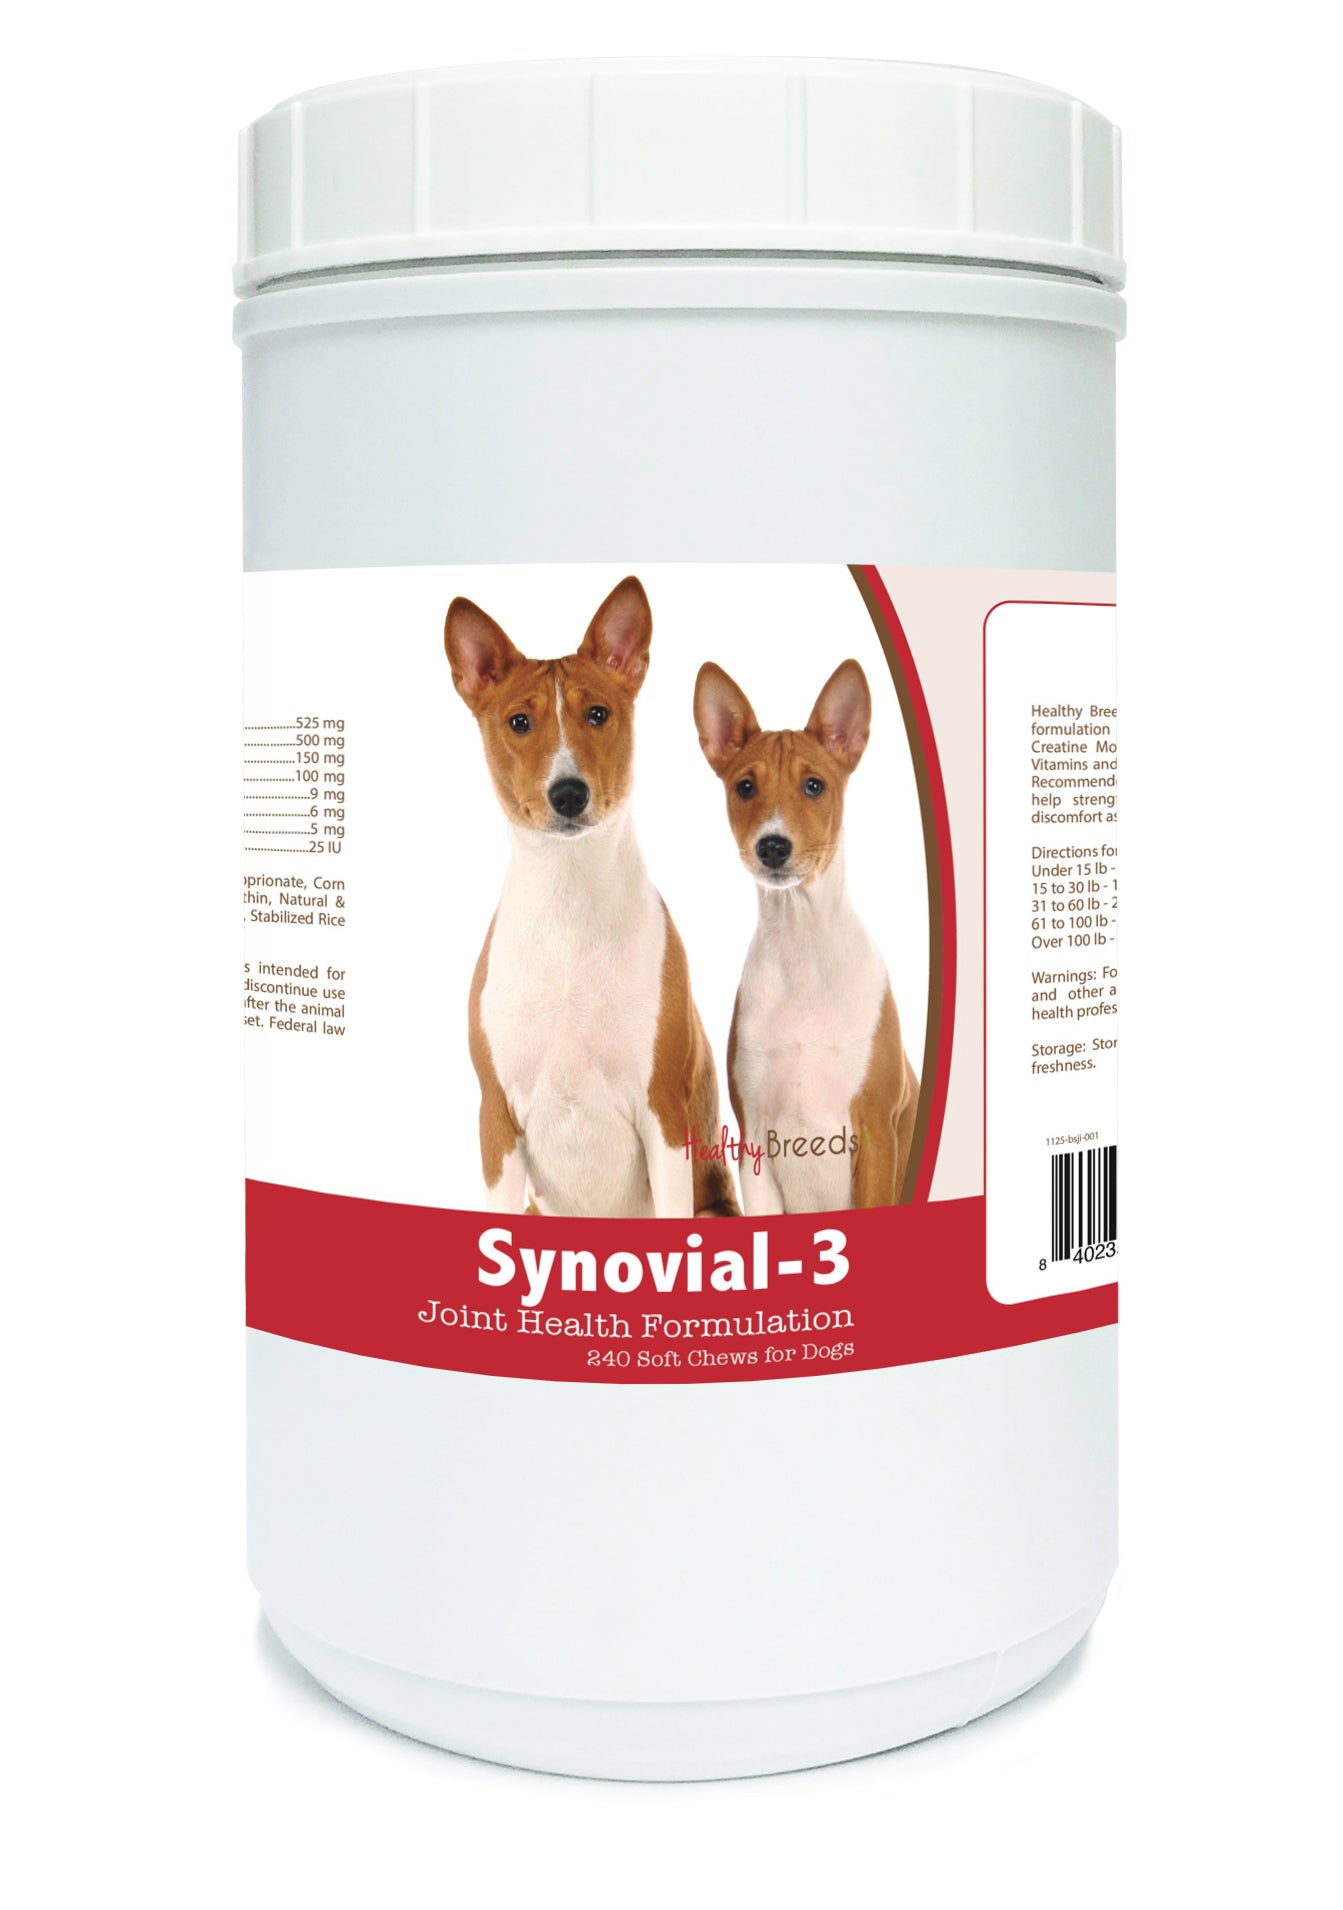 Basenji Synovial-3 Joint Health Formulation Soft Chews 240 Count